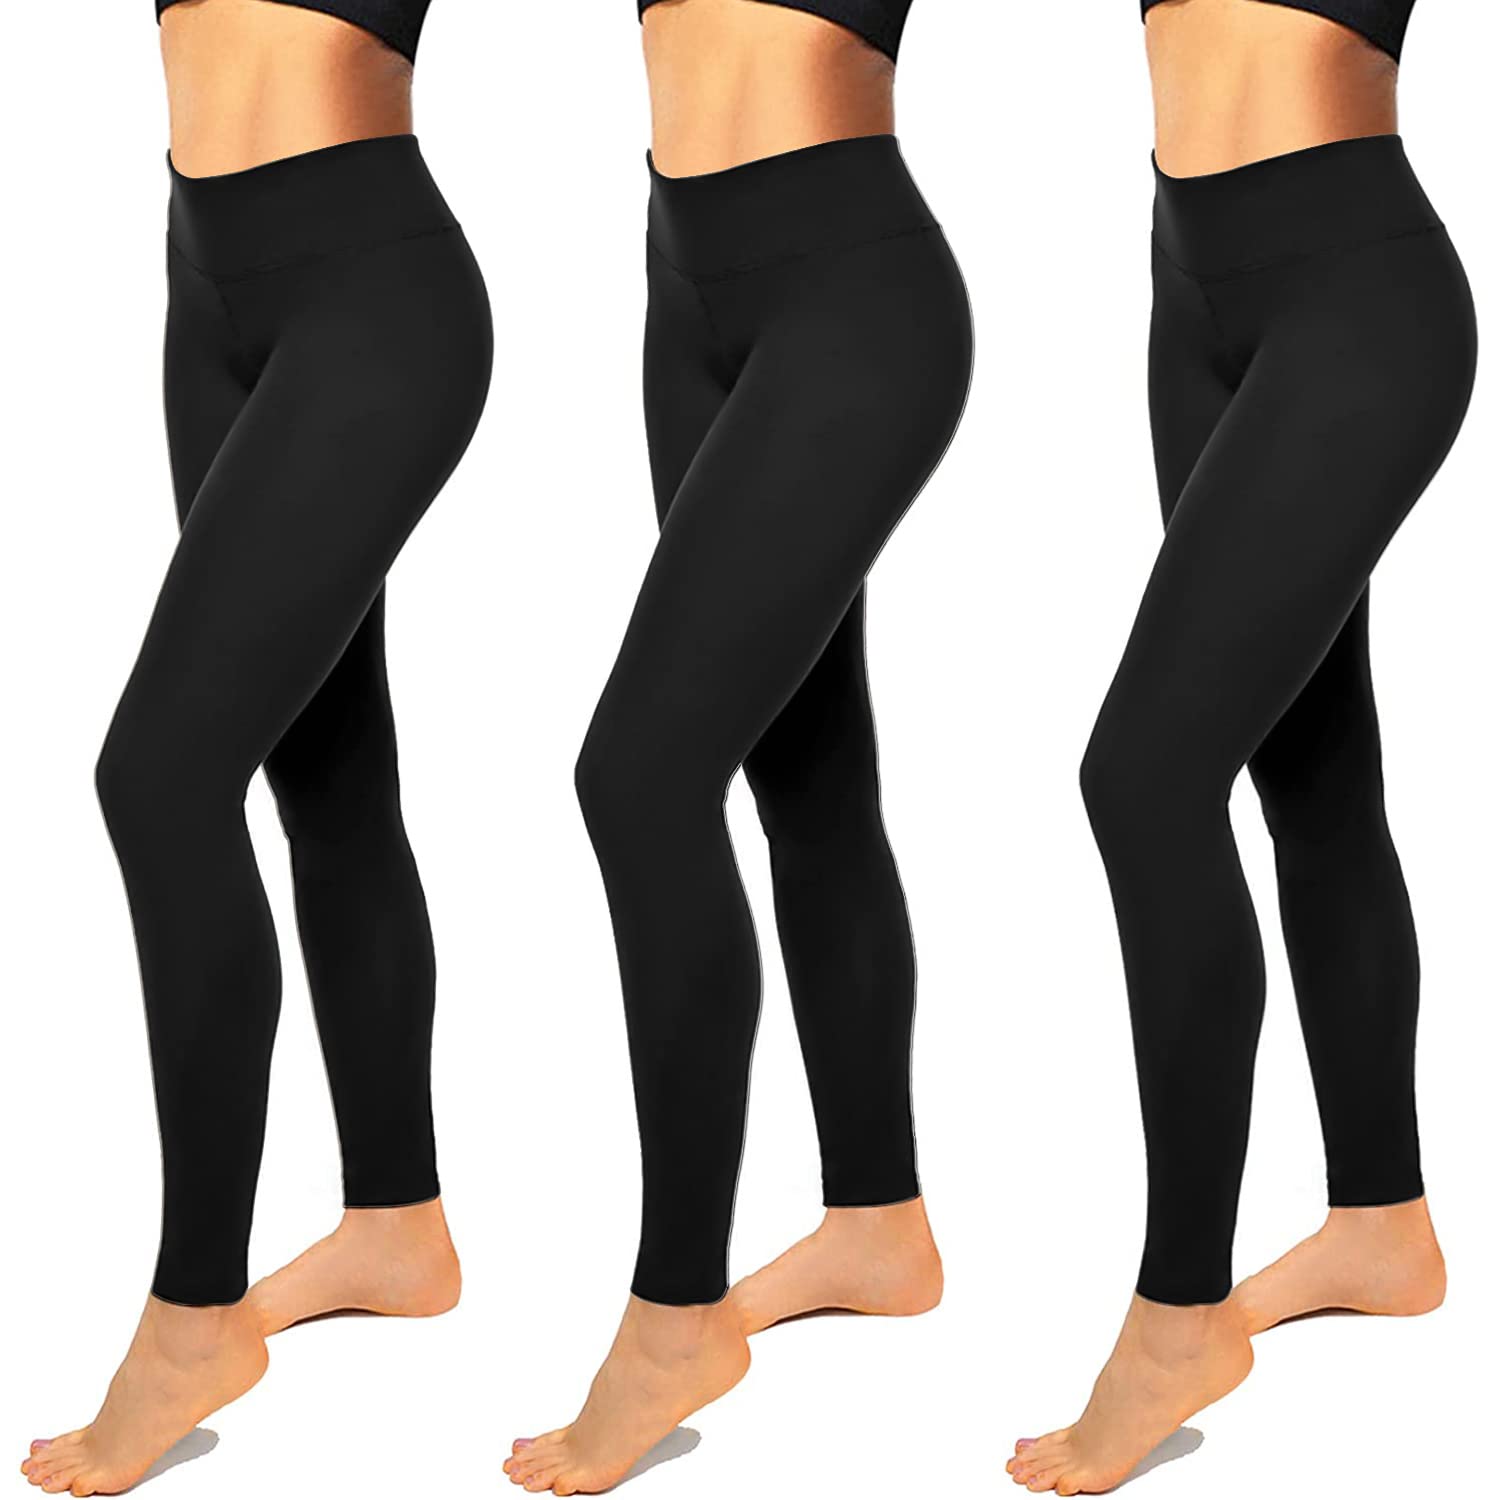 Women black leggings – How to Complete a Stylish Match插图4